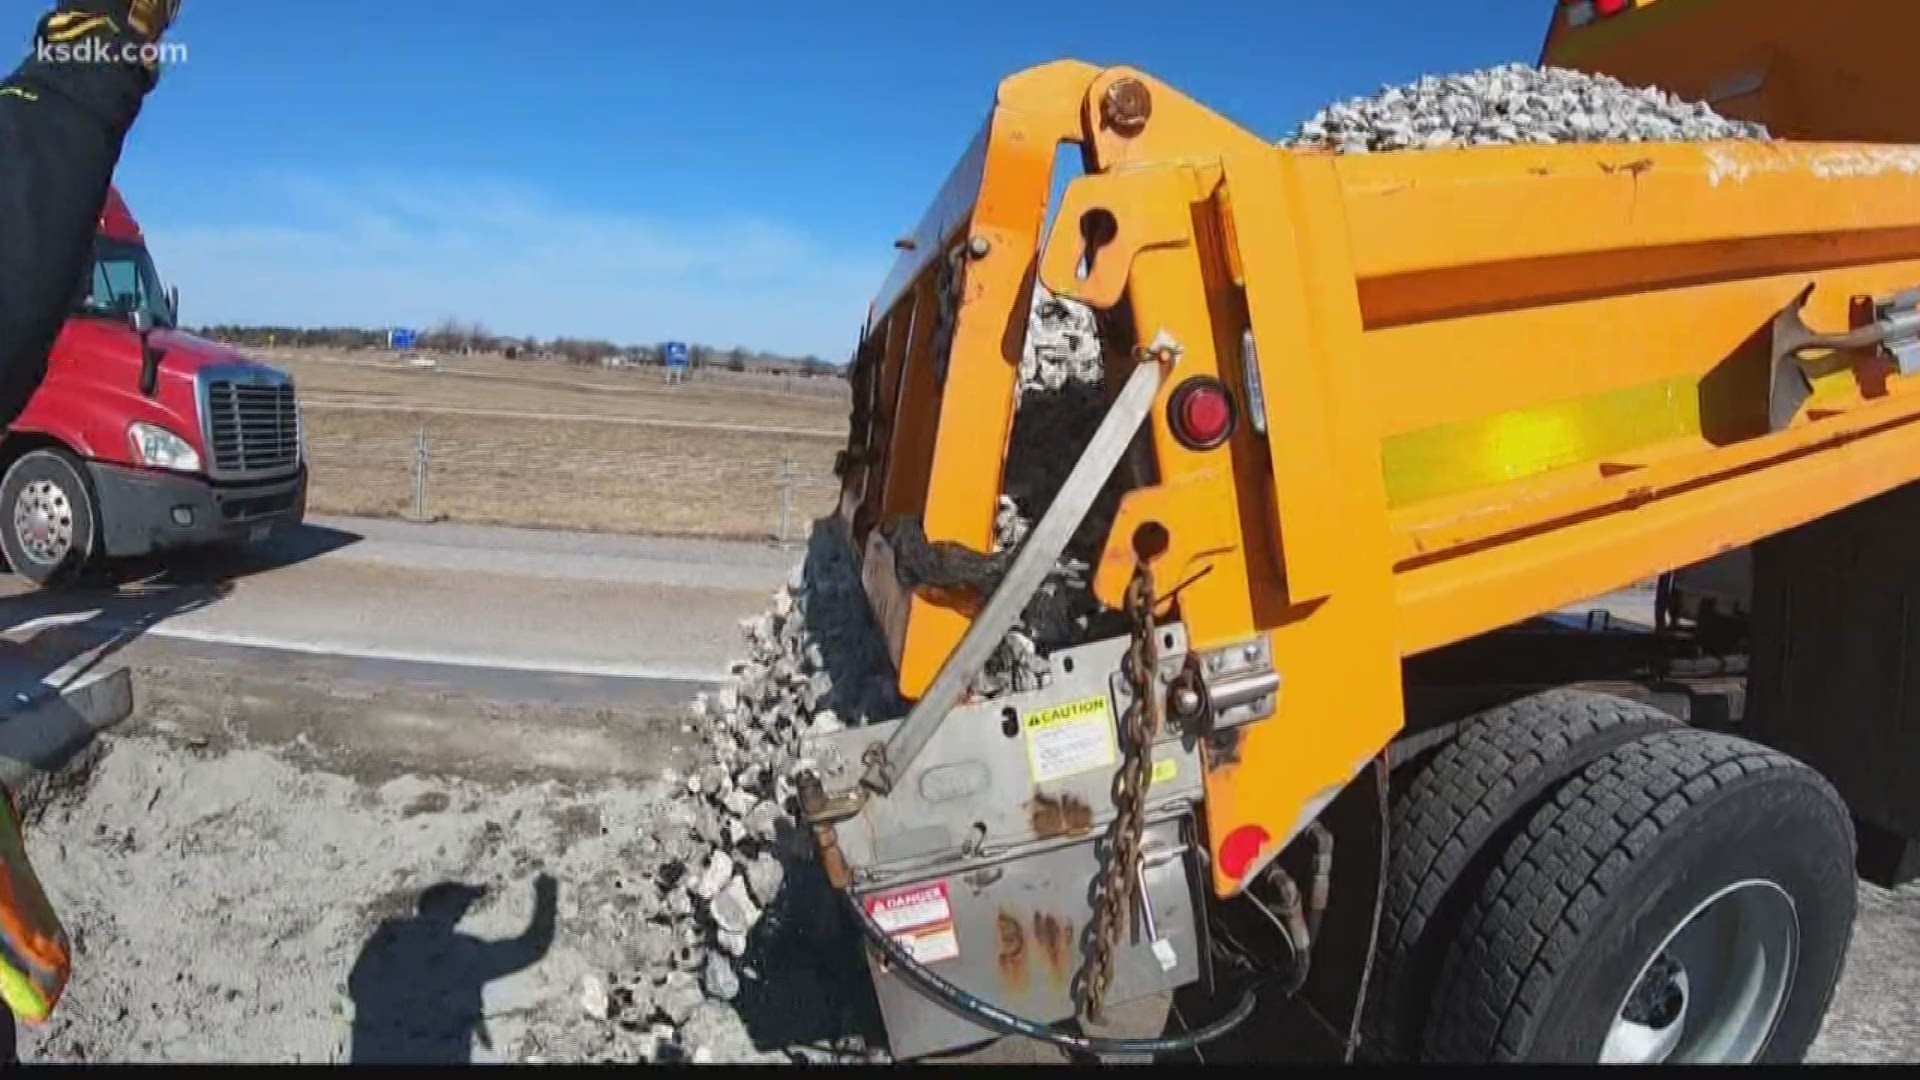 With nice weather Thursday, road crews filled potholes ahead of Friday's snow.